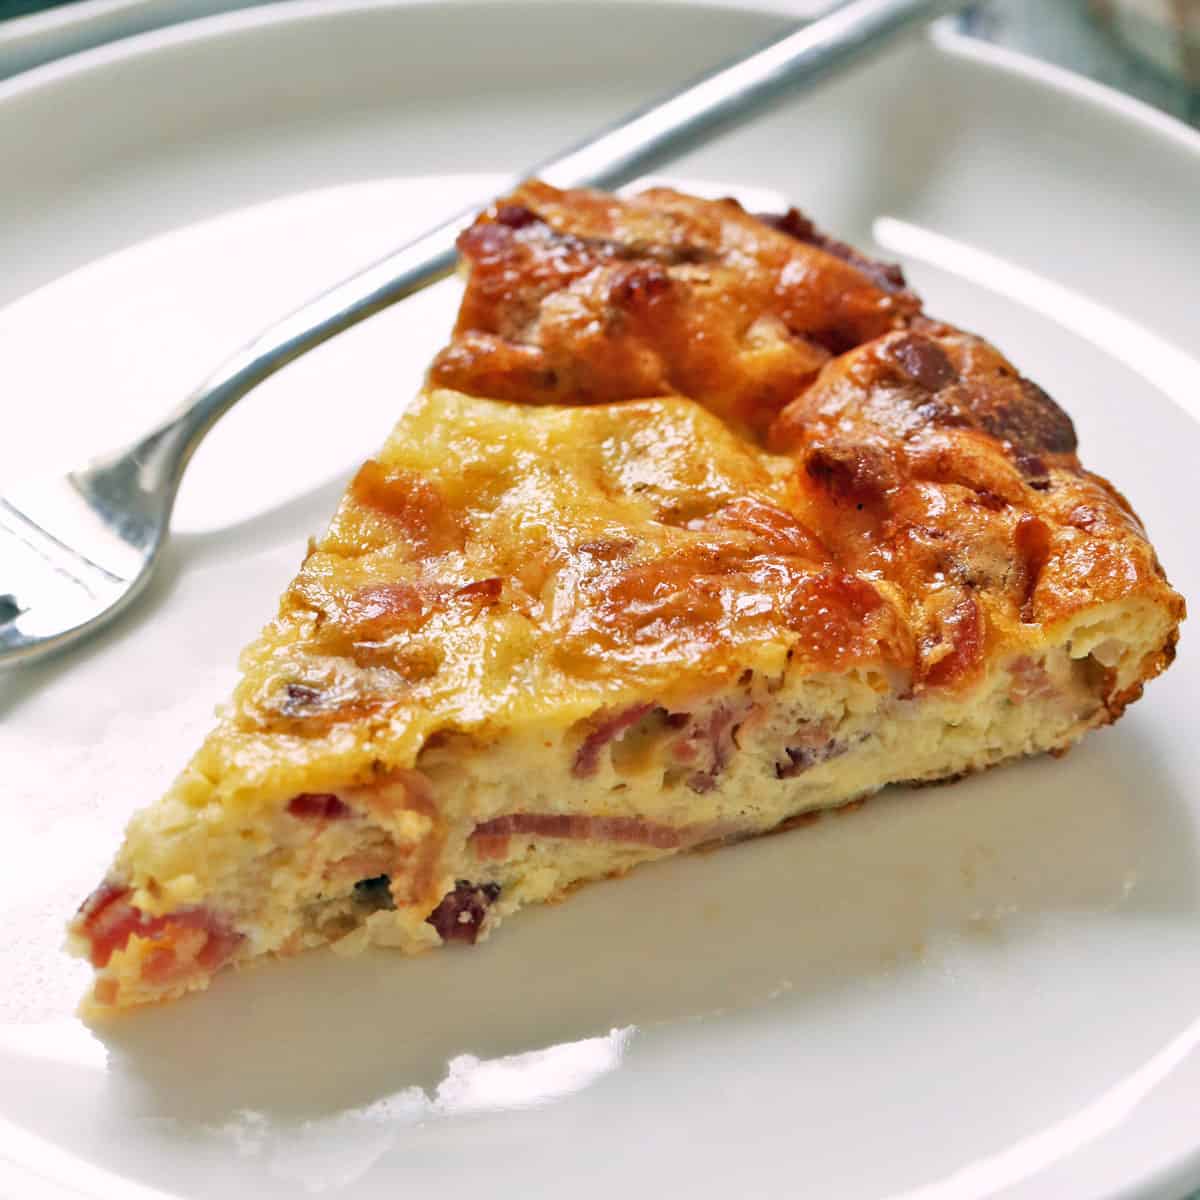 A slice of crustless quiche Lorraine is served on a plate with a fork.